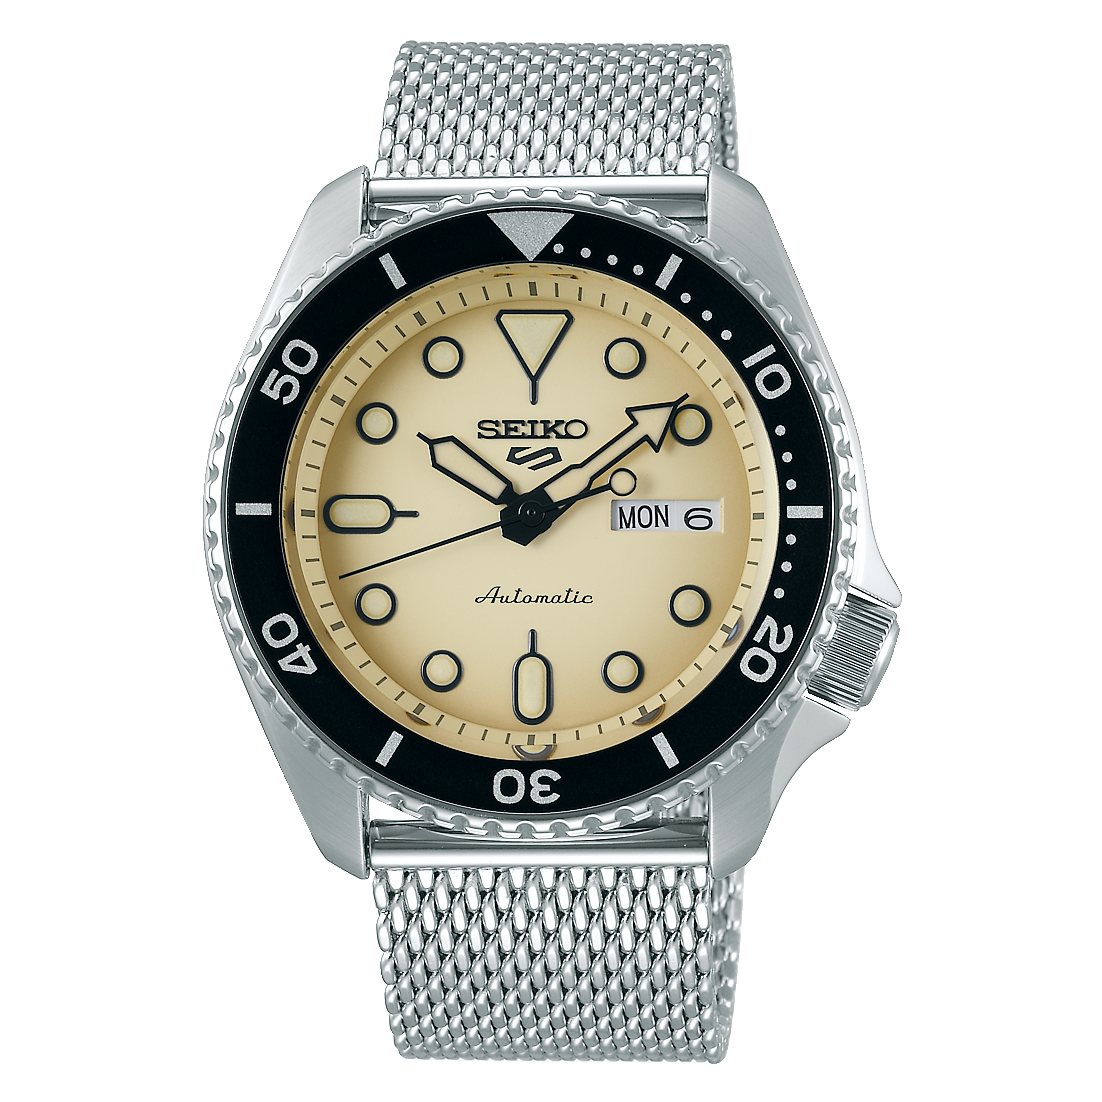 Seiko 5 Sport - Suits Series With Beige Dial